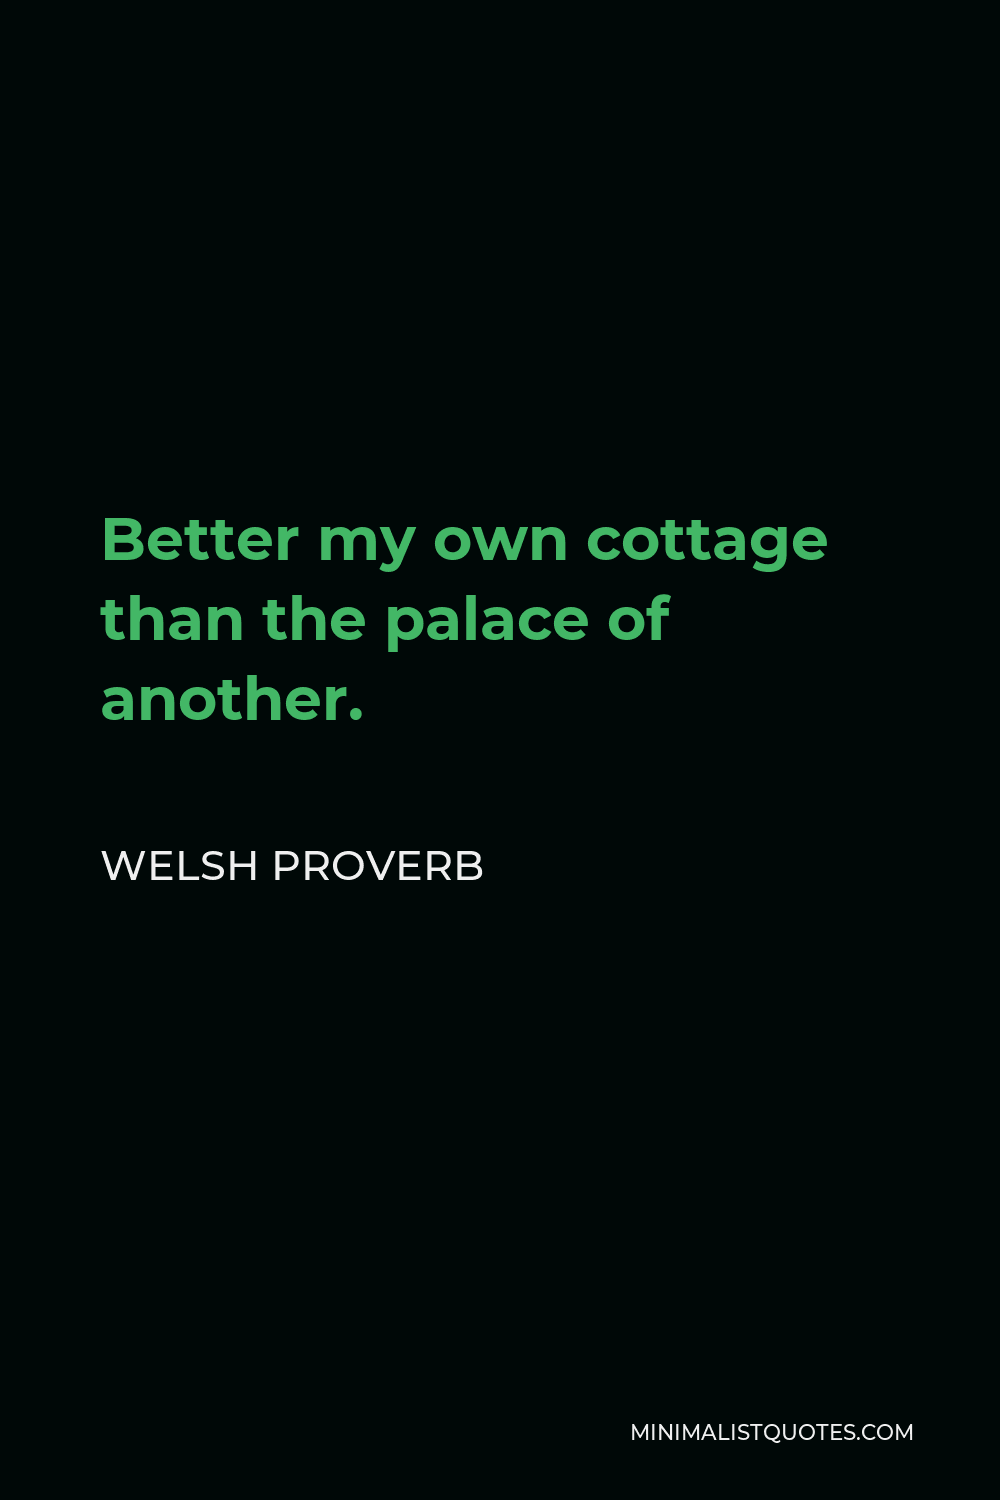 Welsh Proverb Quote - Better my own cottage than the palace of another.